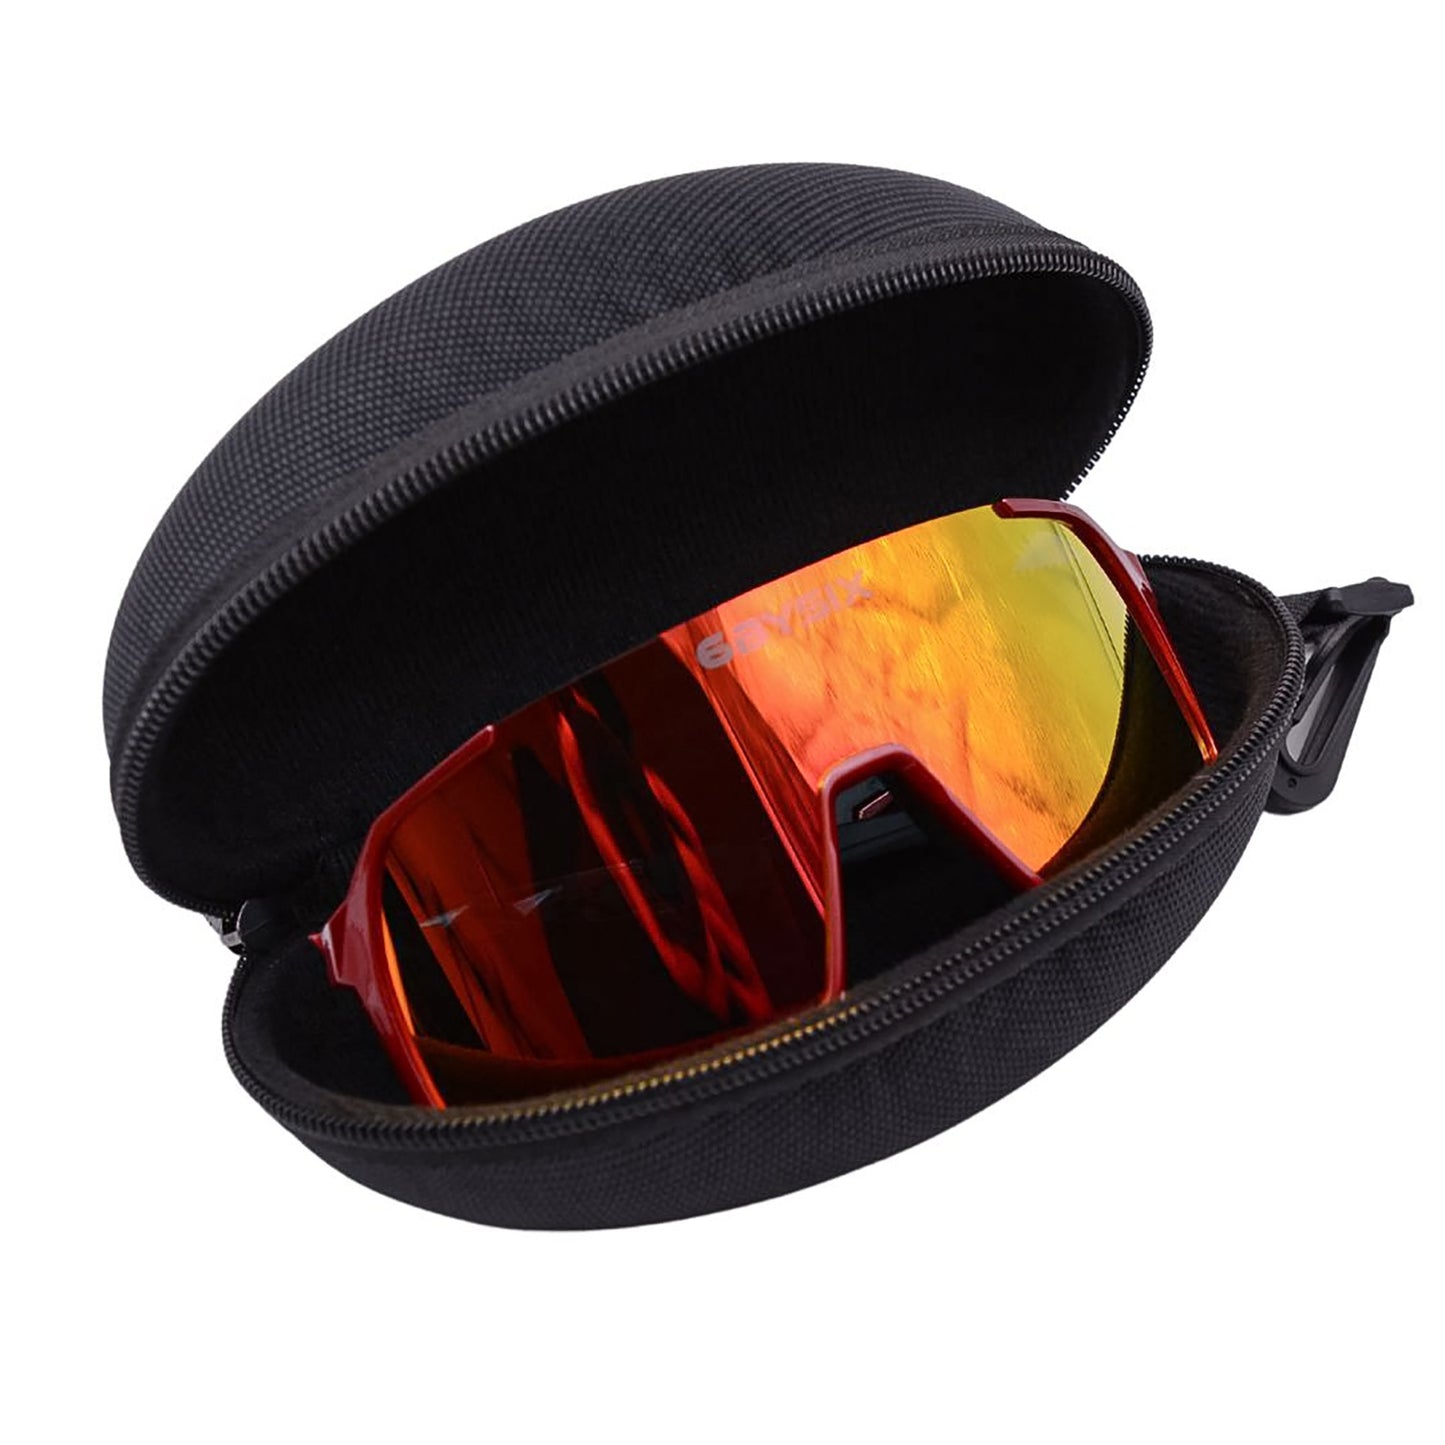 6bySix Comet Racing Shades - Red Flare Gold